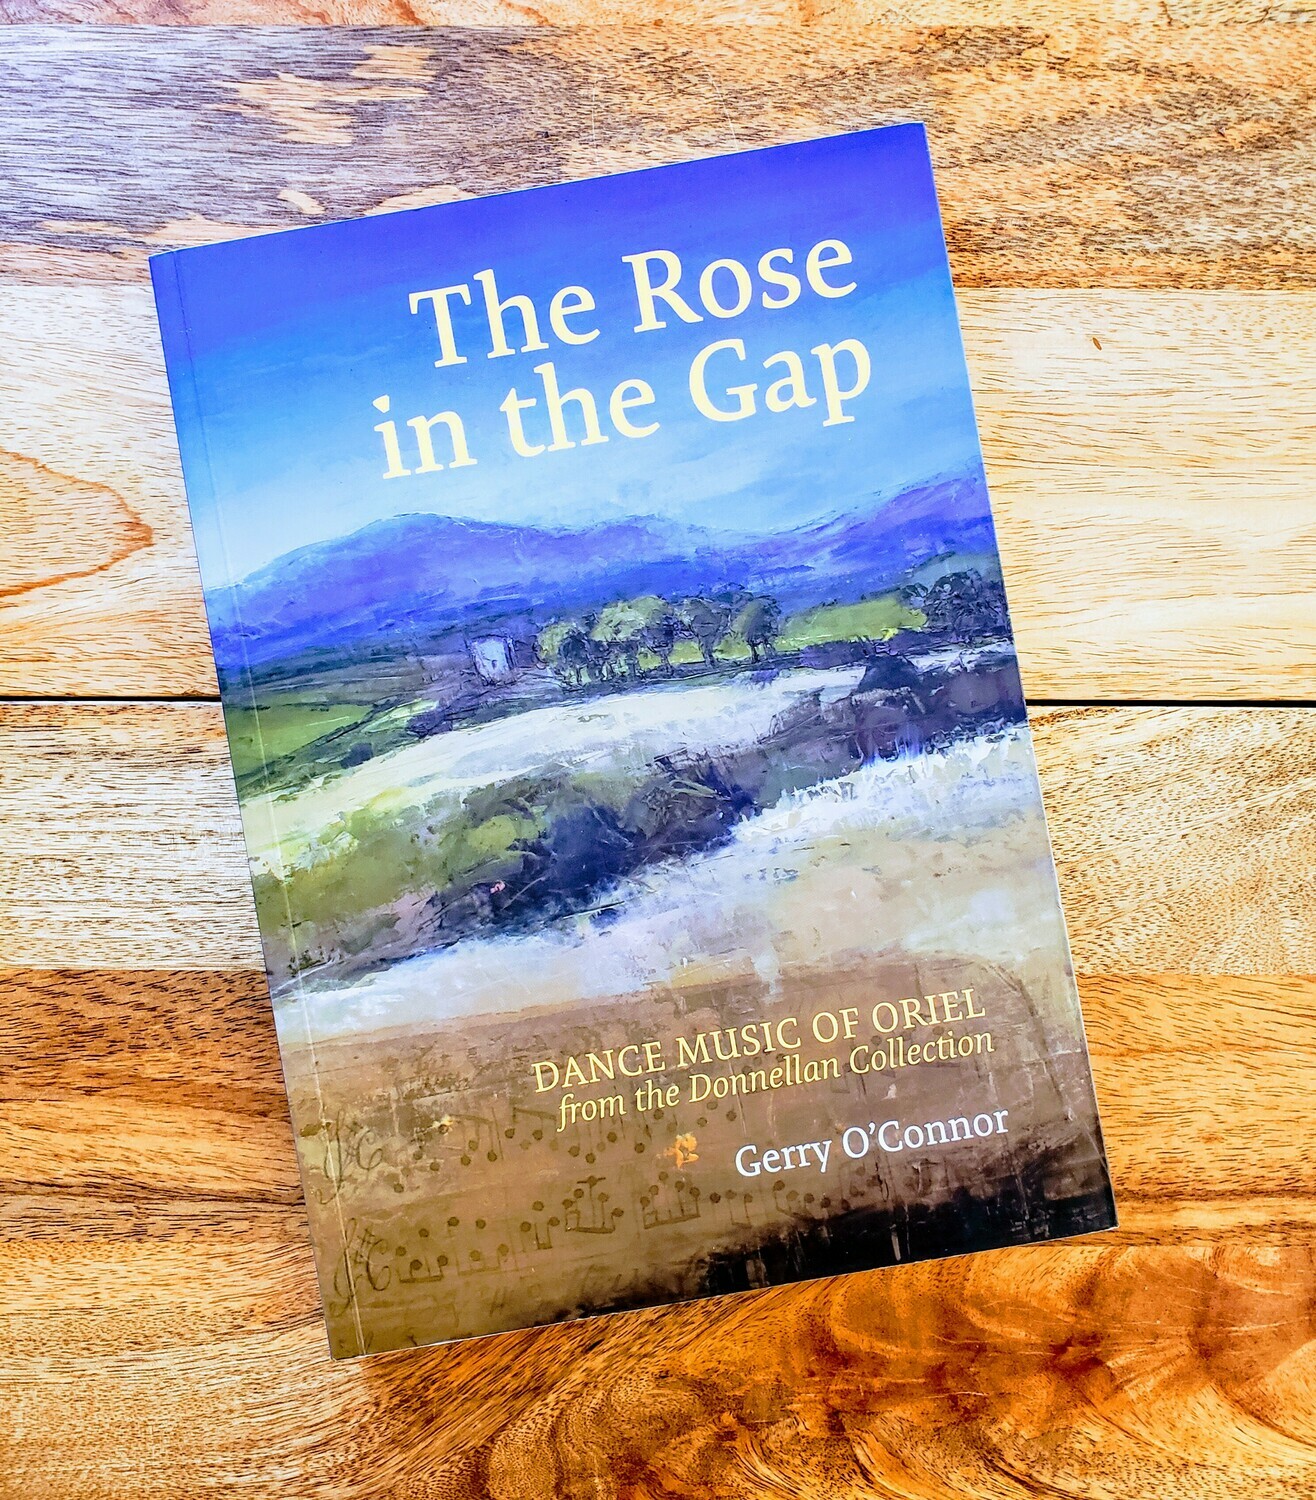 Gerry O'Connor's "The Rose In The Gap"